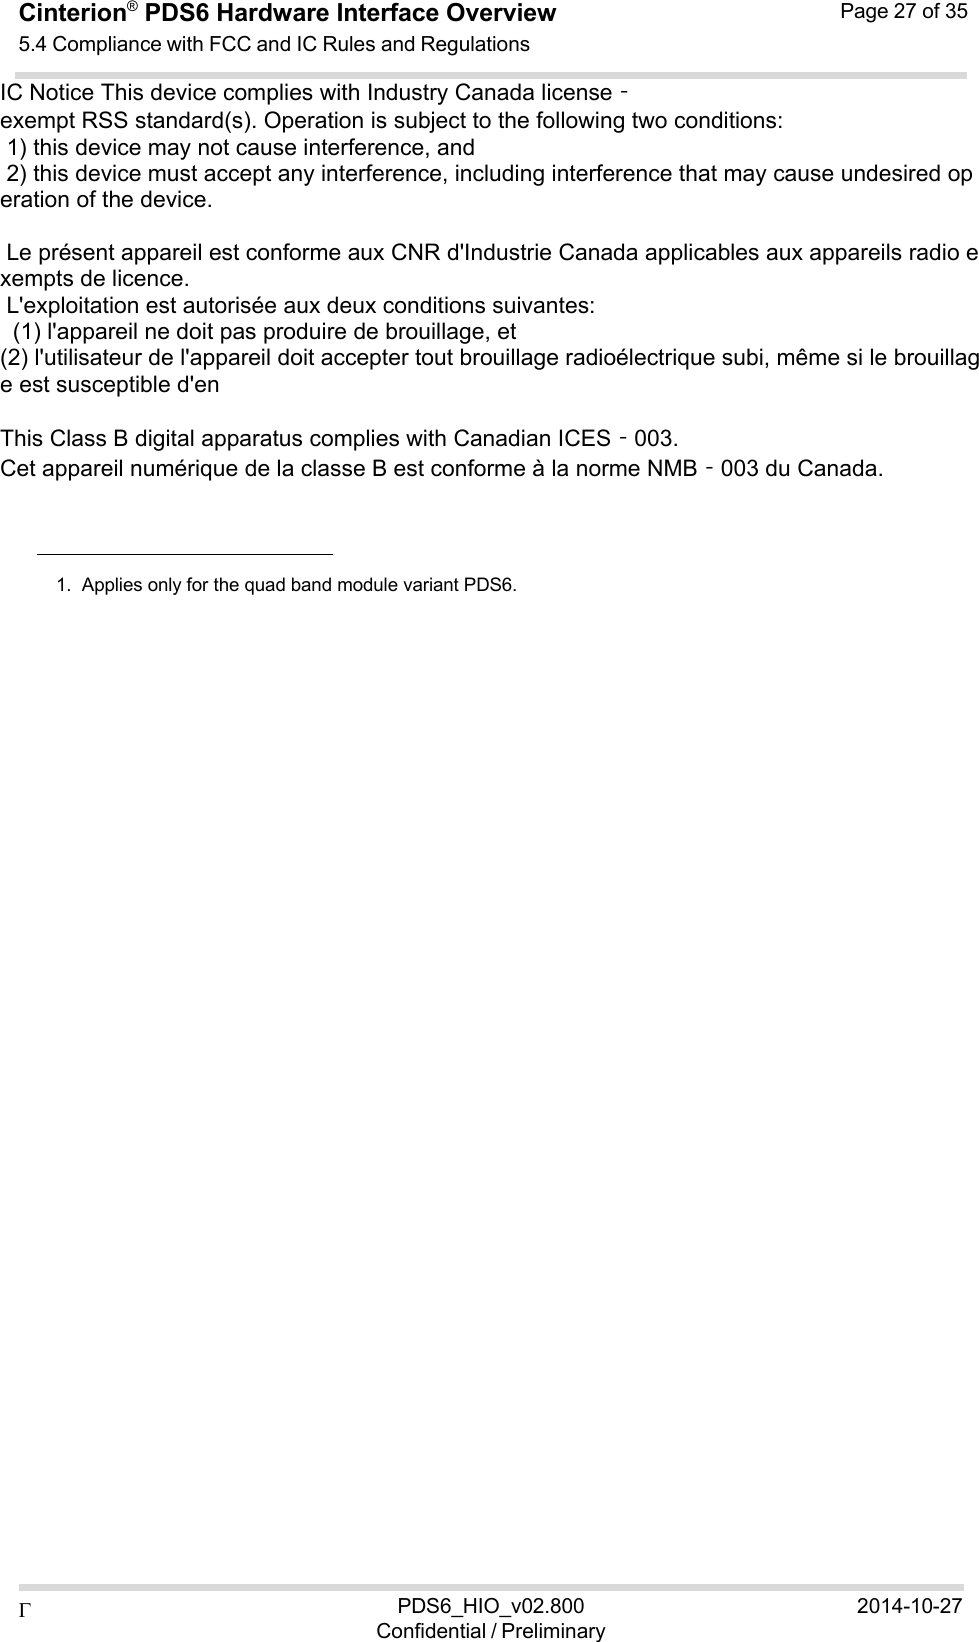  PDS6_HIO_v02.800Confidential / Preliminary2014-10-27Cinterion®  PDS6 Hardware Interface Overview 5.4 Compliance with FCC and IC Rules and Regulations Page 27 of 35  IC Notice This device complies with Industry Canada license‐exempt RSS standard(s). Operation is subject to the following two conditions:   1) this device may not cause interference, and  2) this device must accept any interference, including interference that may cause undesired operation of the device.    Le présent appareil est conforme aux CNR d&apos;Industrie Canada applicables aux appareils radio exempts de licence.  L&apos;exploitation est autorisée aux deux conditions suivantes:    (1) l&apos;appareil ne doit pas produire de brouillage, et  (2) l&apos;utilisateur de l&apos;appareil doit accepter tout brouillage radioélectrique subi, même si le brouillage est susceptible d&apos;en    This Class B digital apparatus complies with Canadian ICES‐003. Cet appareil numérique de la classe B est conforme à la norme NMB‐003 du Canada.        1.  Applies only for the quad band module variant PDS6. 